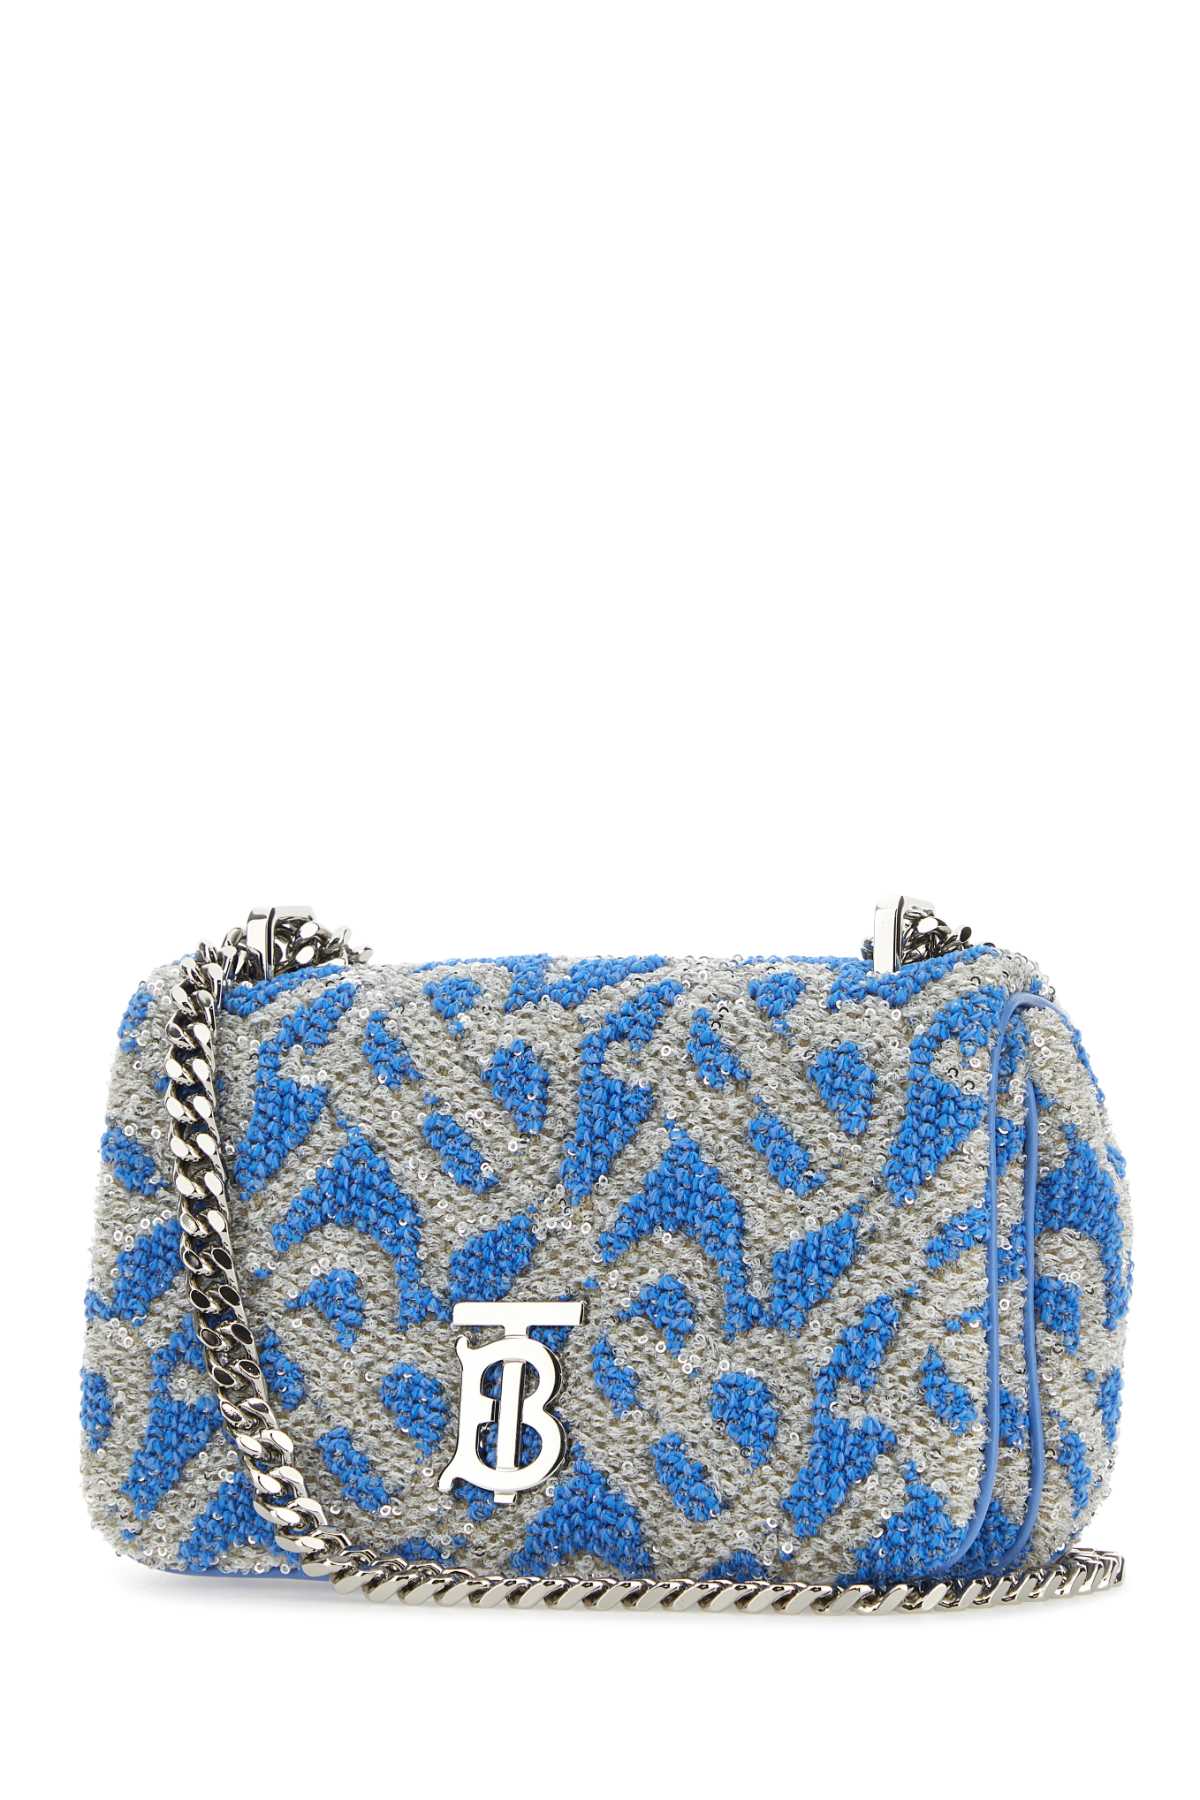 Burberry Embroidered Fabric Mini Lola Shoulder Bag In Coolcornflowerblue